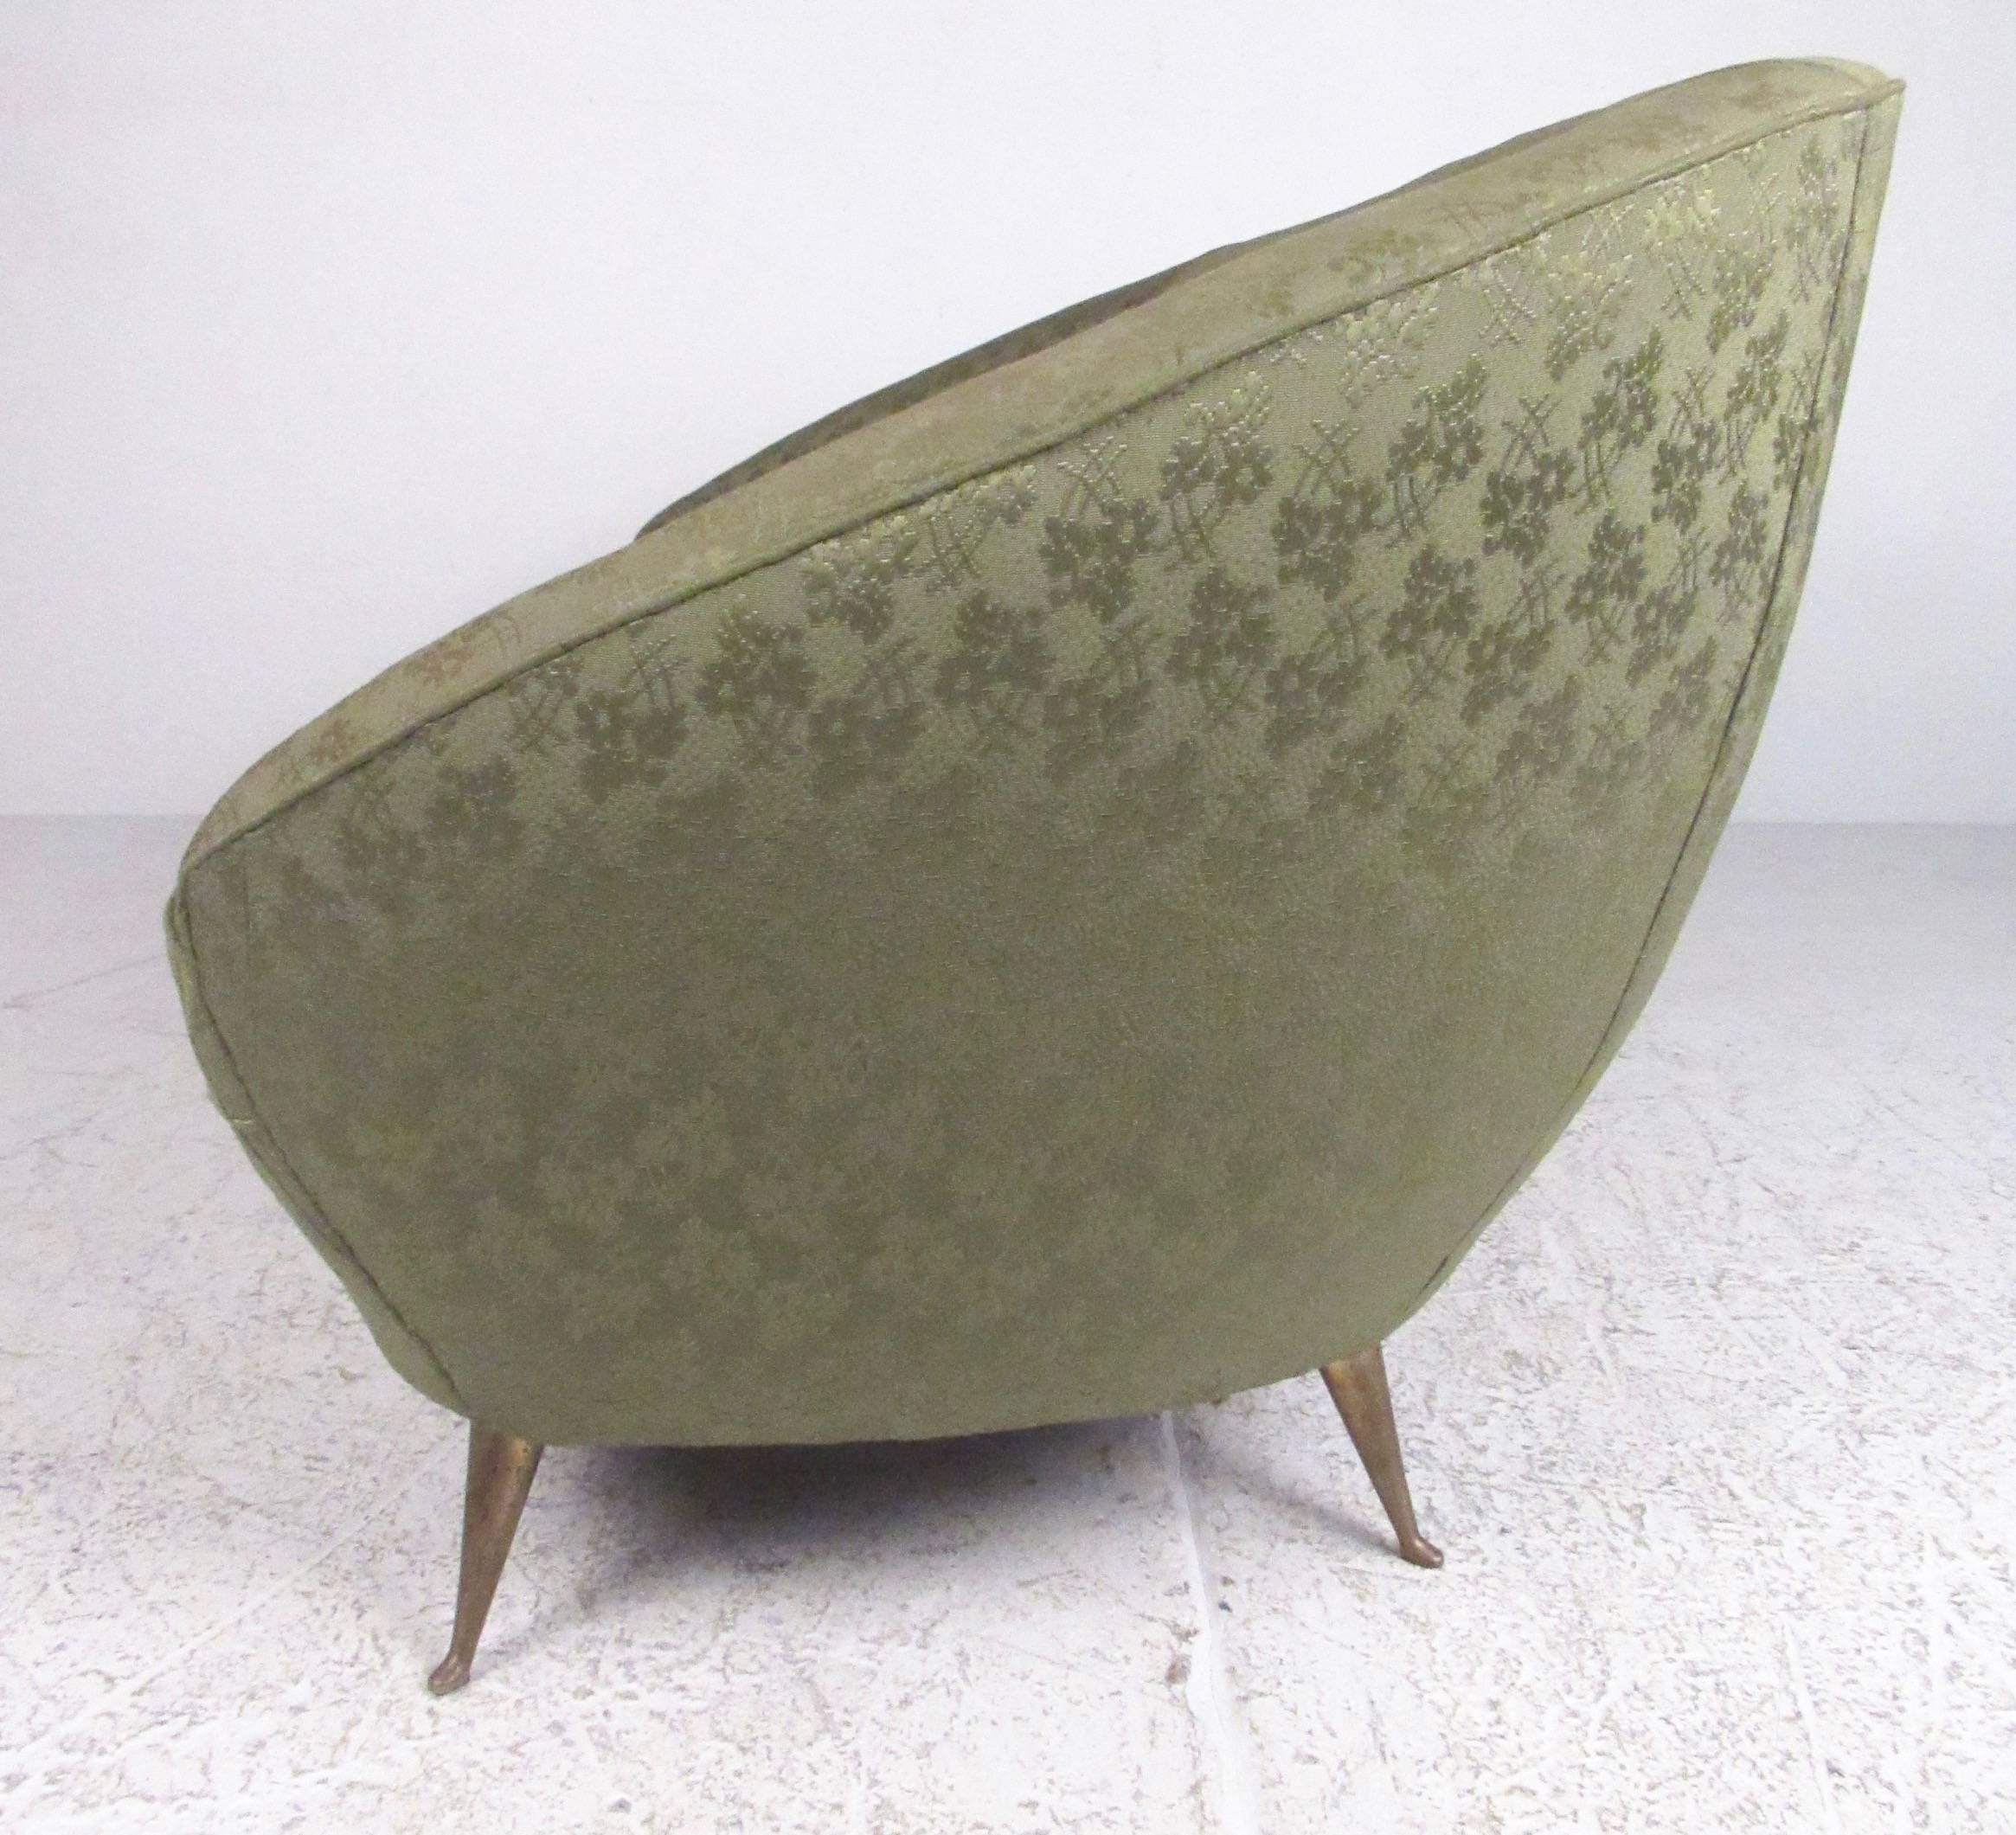 This stylish vintage modern love seat features unique vintage fabric, shapely rounded seat back, and tapered brass legs. The comfortable design of this Italian Modern sofa makes an impressive seating addition to any interior. Please confirm item